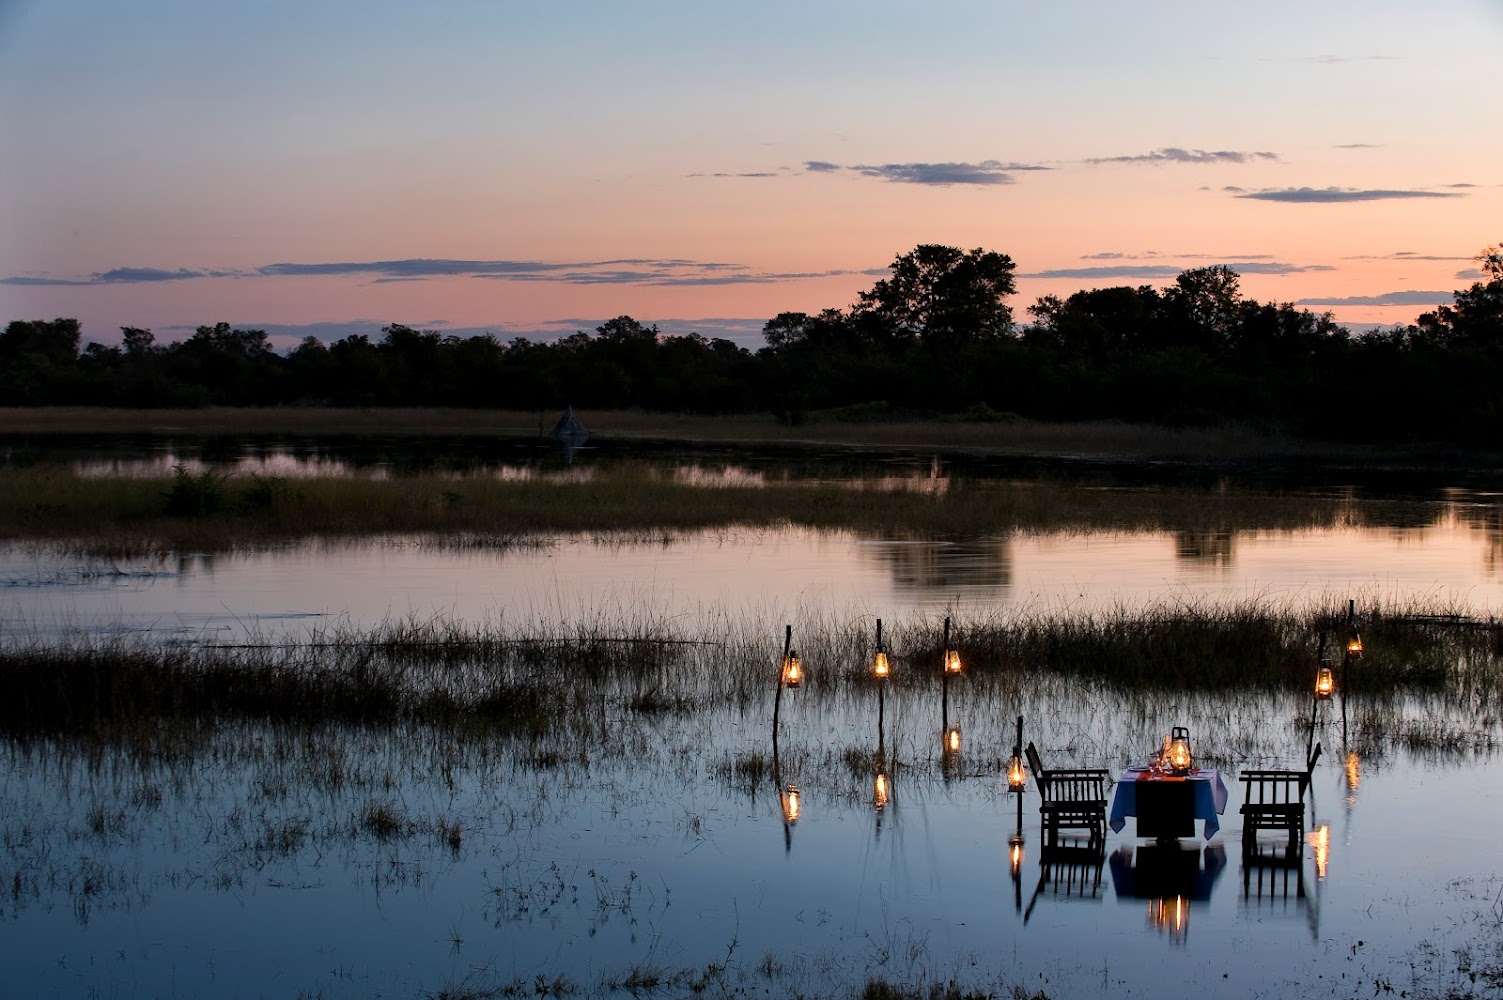 Great Plains has opened Okavango Explorers Camp in northern Botswana, a six-bed retreat located in the 160,000-hectare private Selinda Reserve.